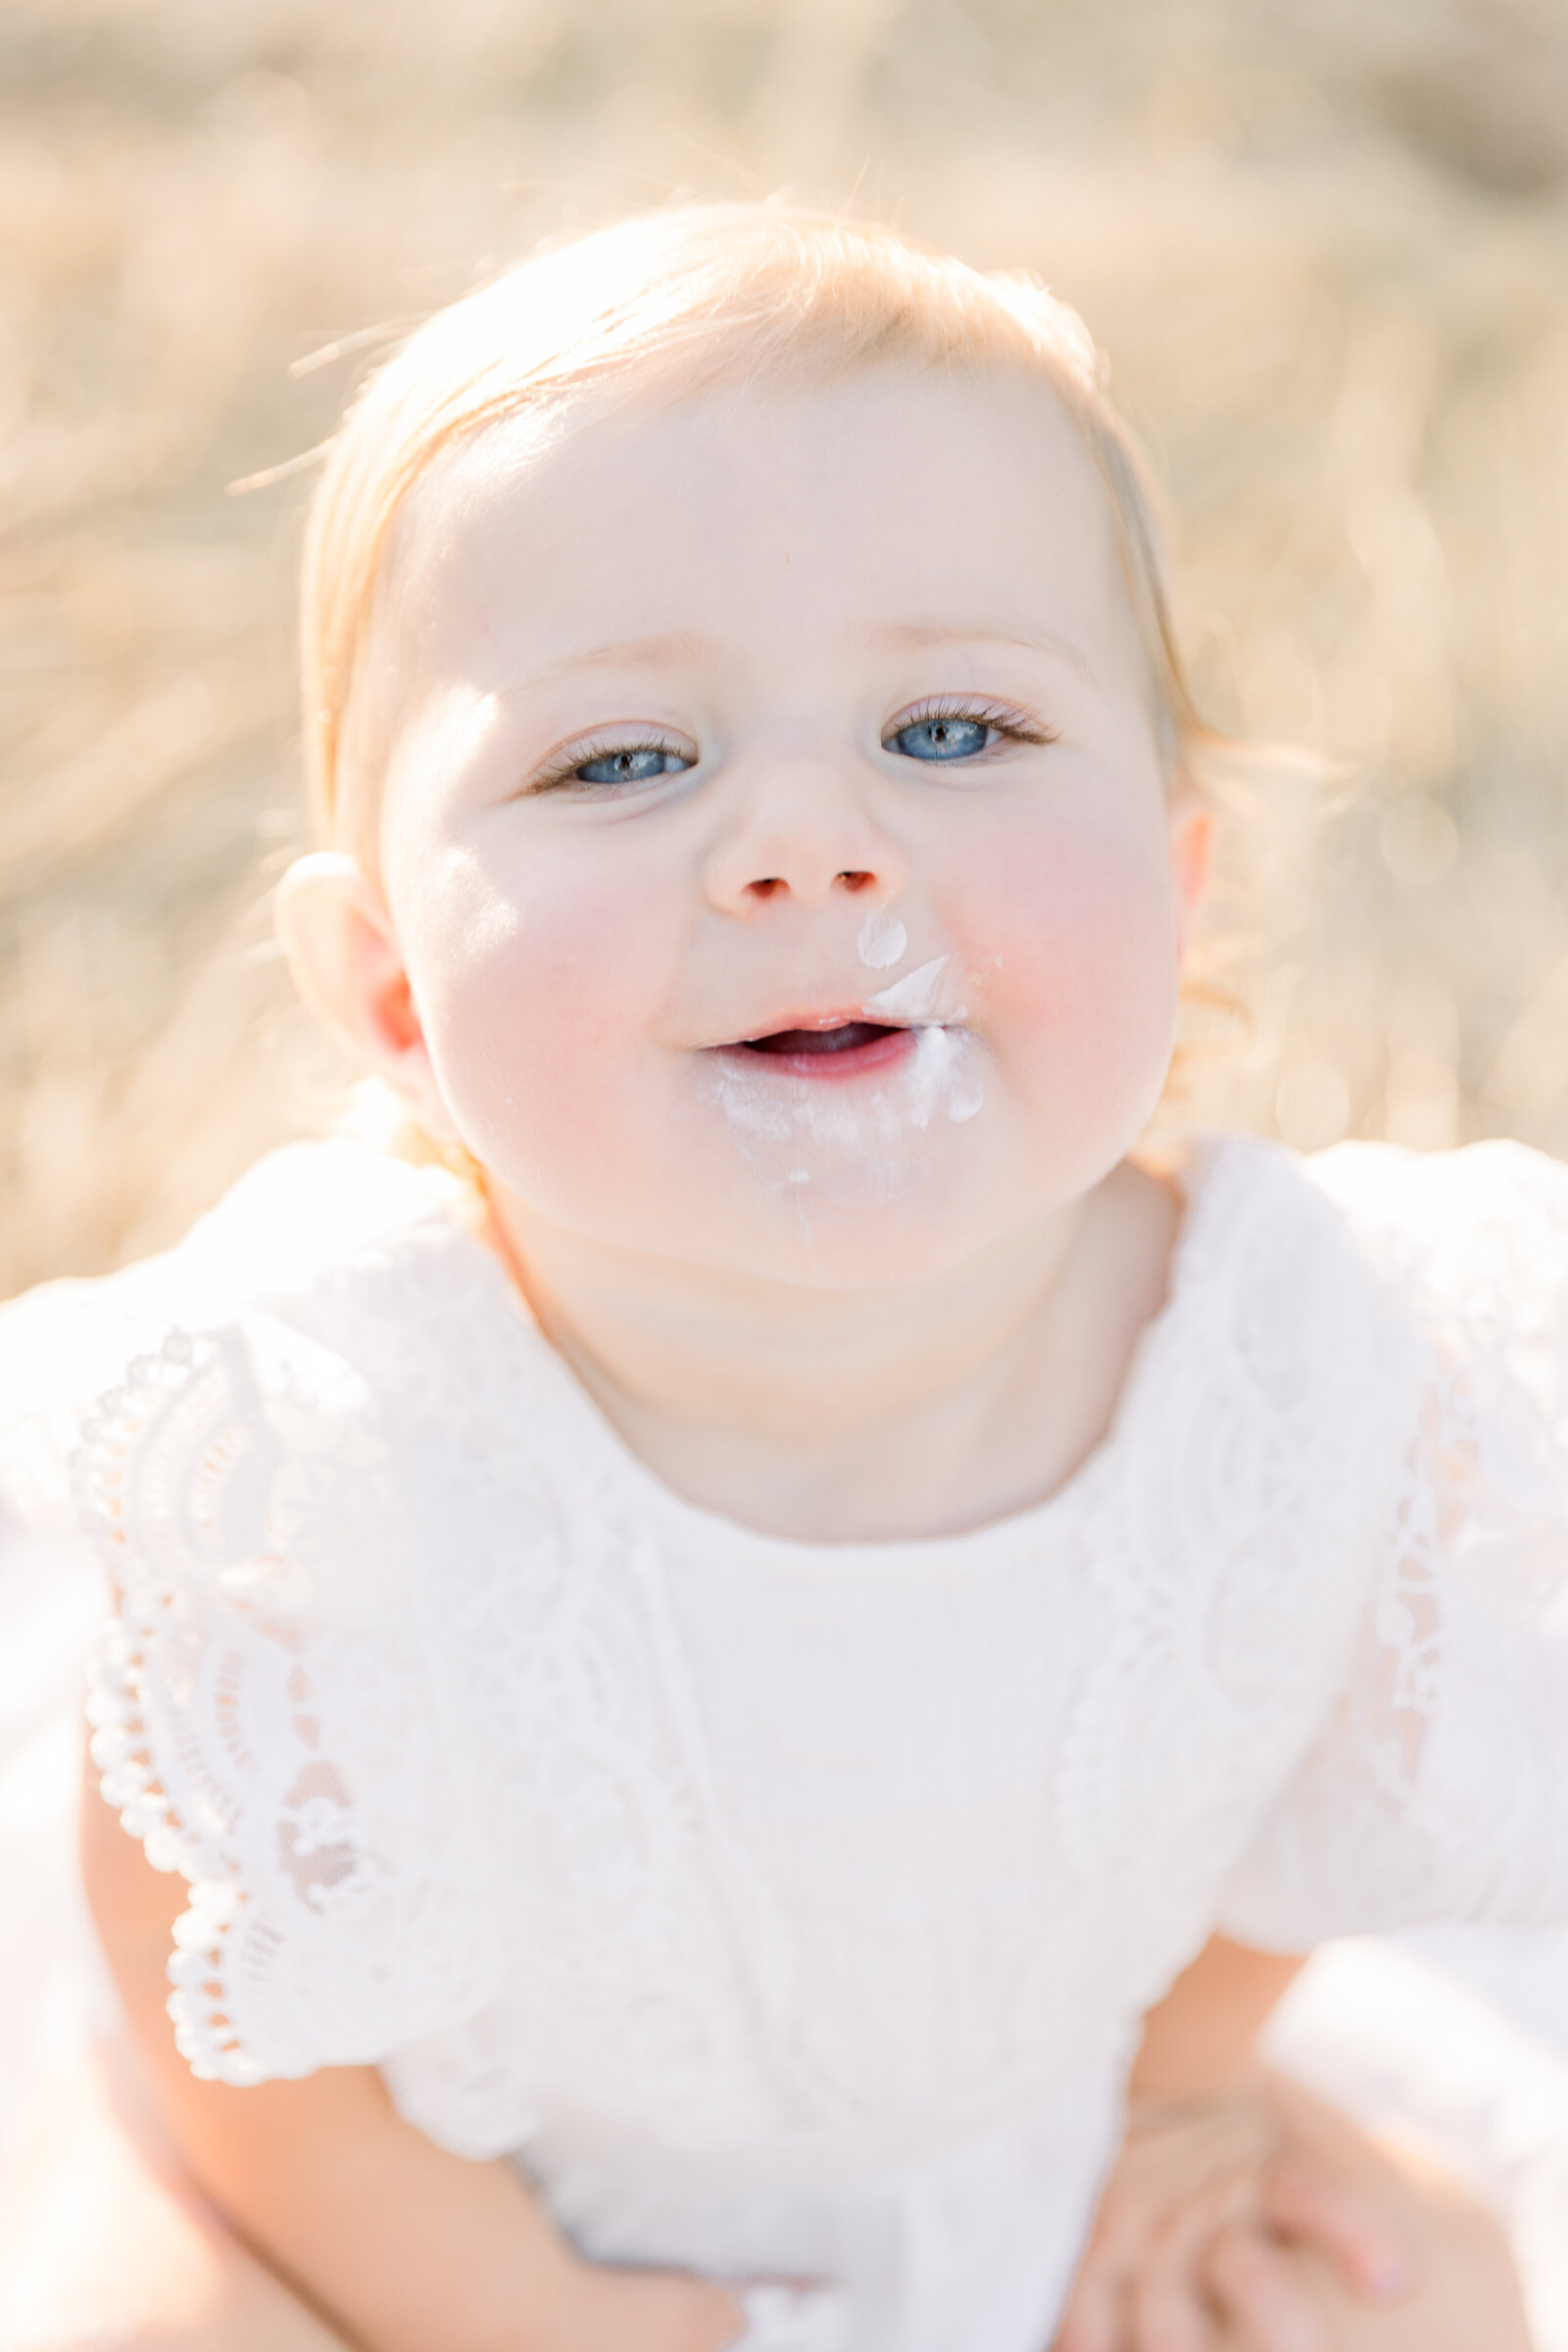 One year old baby with cake on face taken by Sacramento Newborn Photographer Kelsey Krall